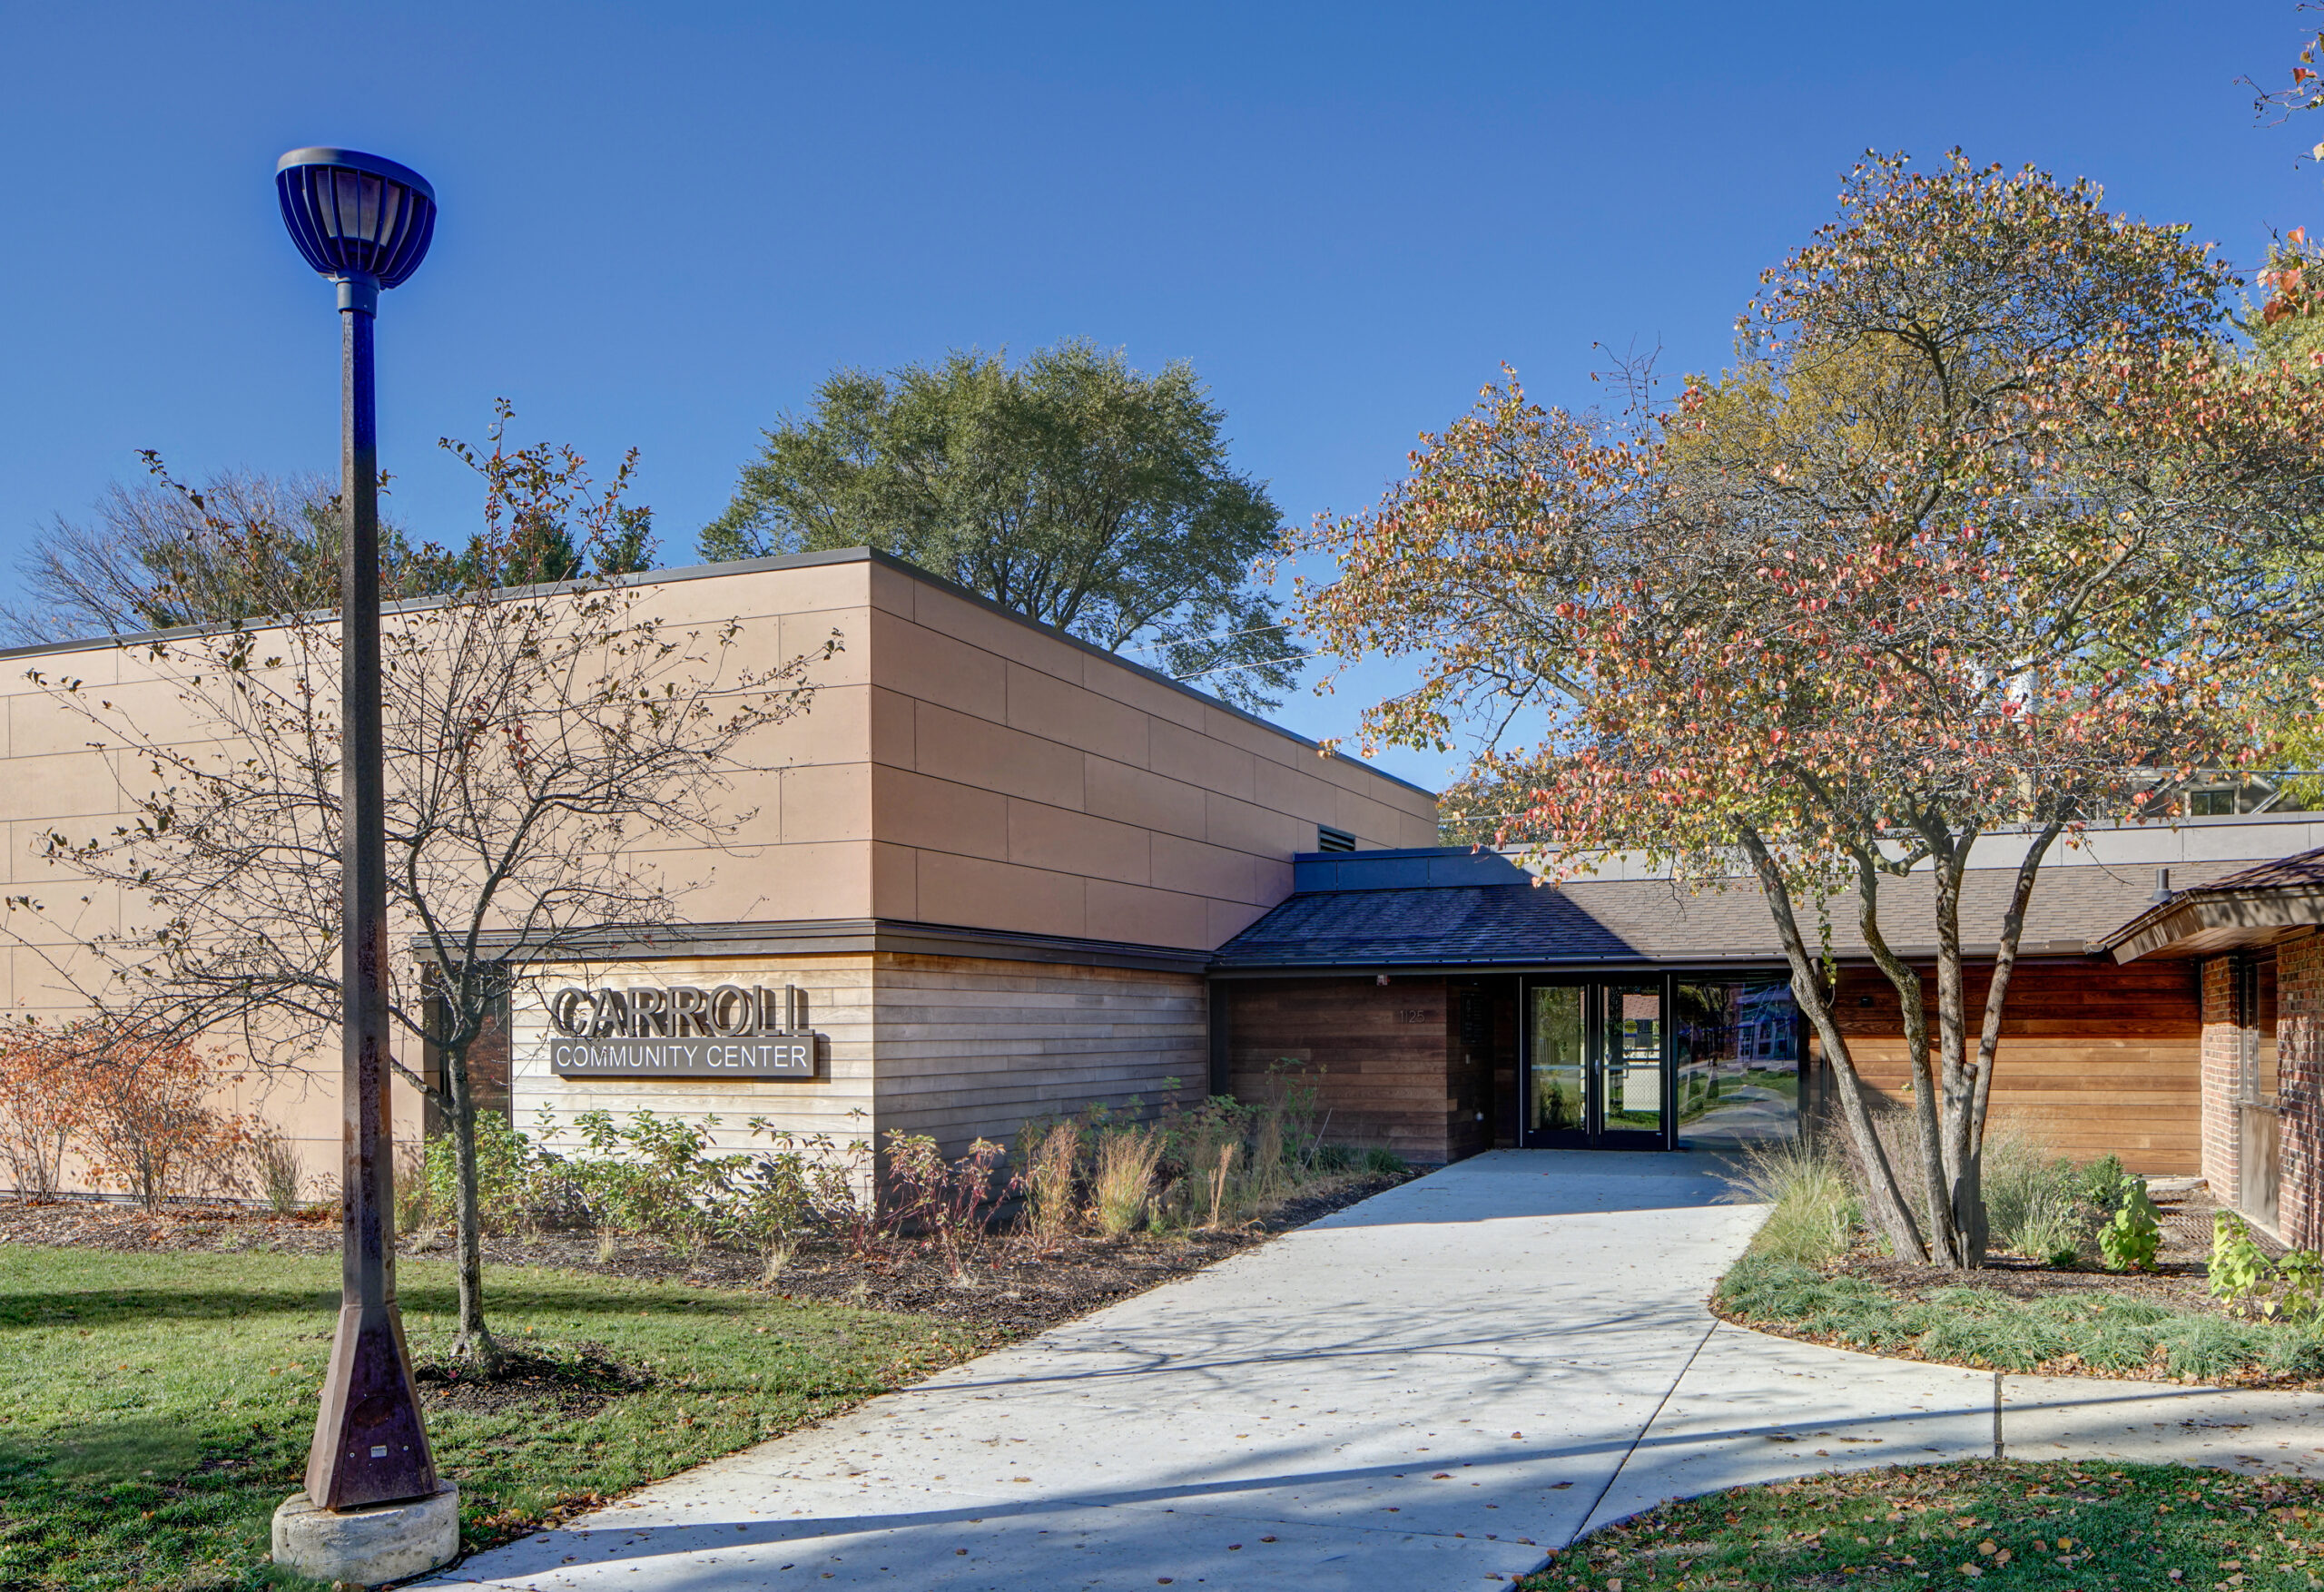 Oak Park's Carroll Community Center received a $577,800 grant from ICECF to achieve Passive House Certifi cation and Source Zero
Energy Certification. (Photo credit to Hausman Photography.)